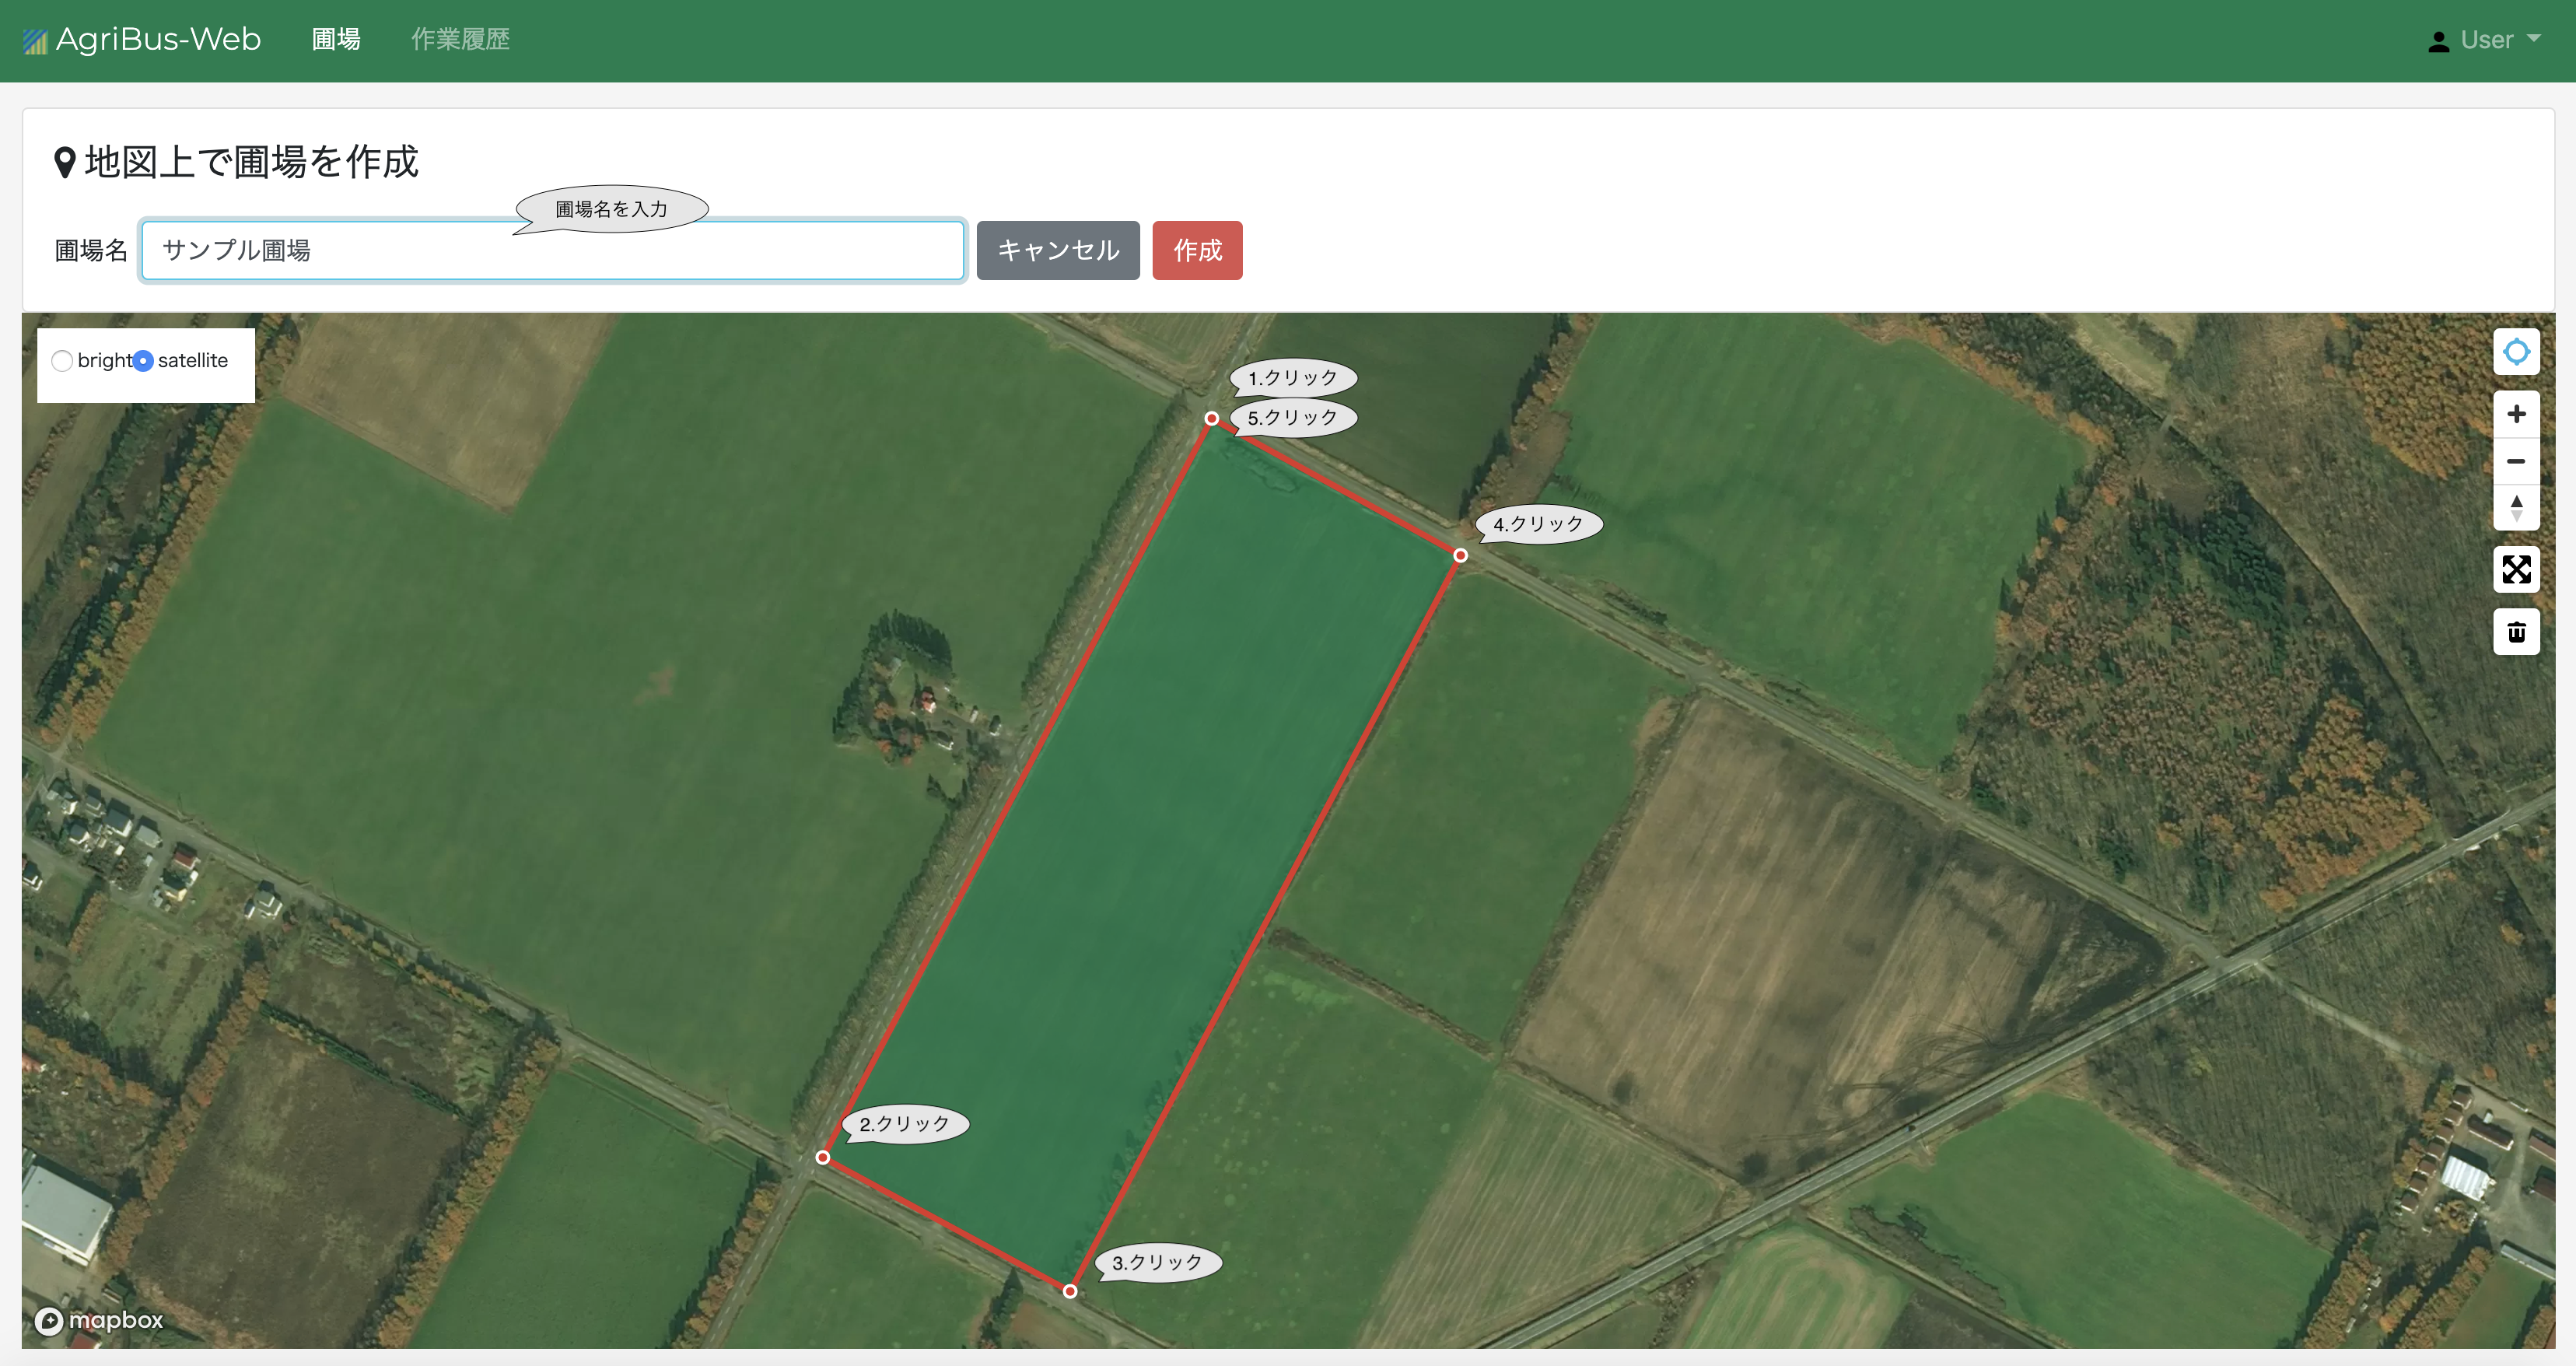 Announcement of AgriBus-Web field creation function release